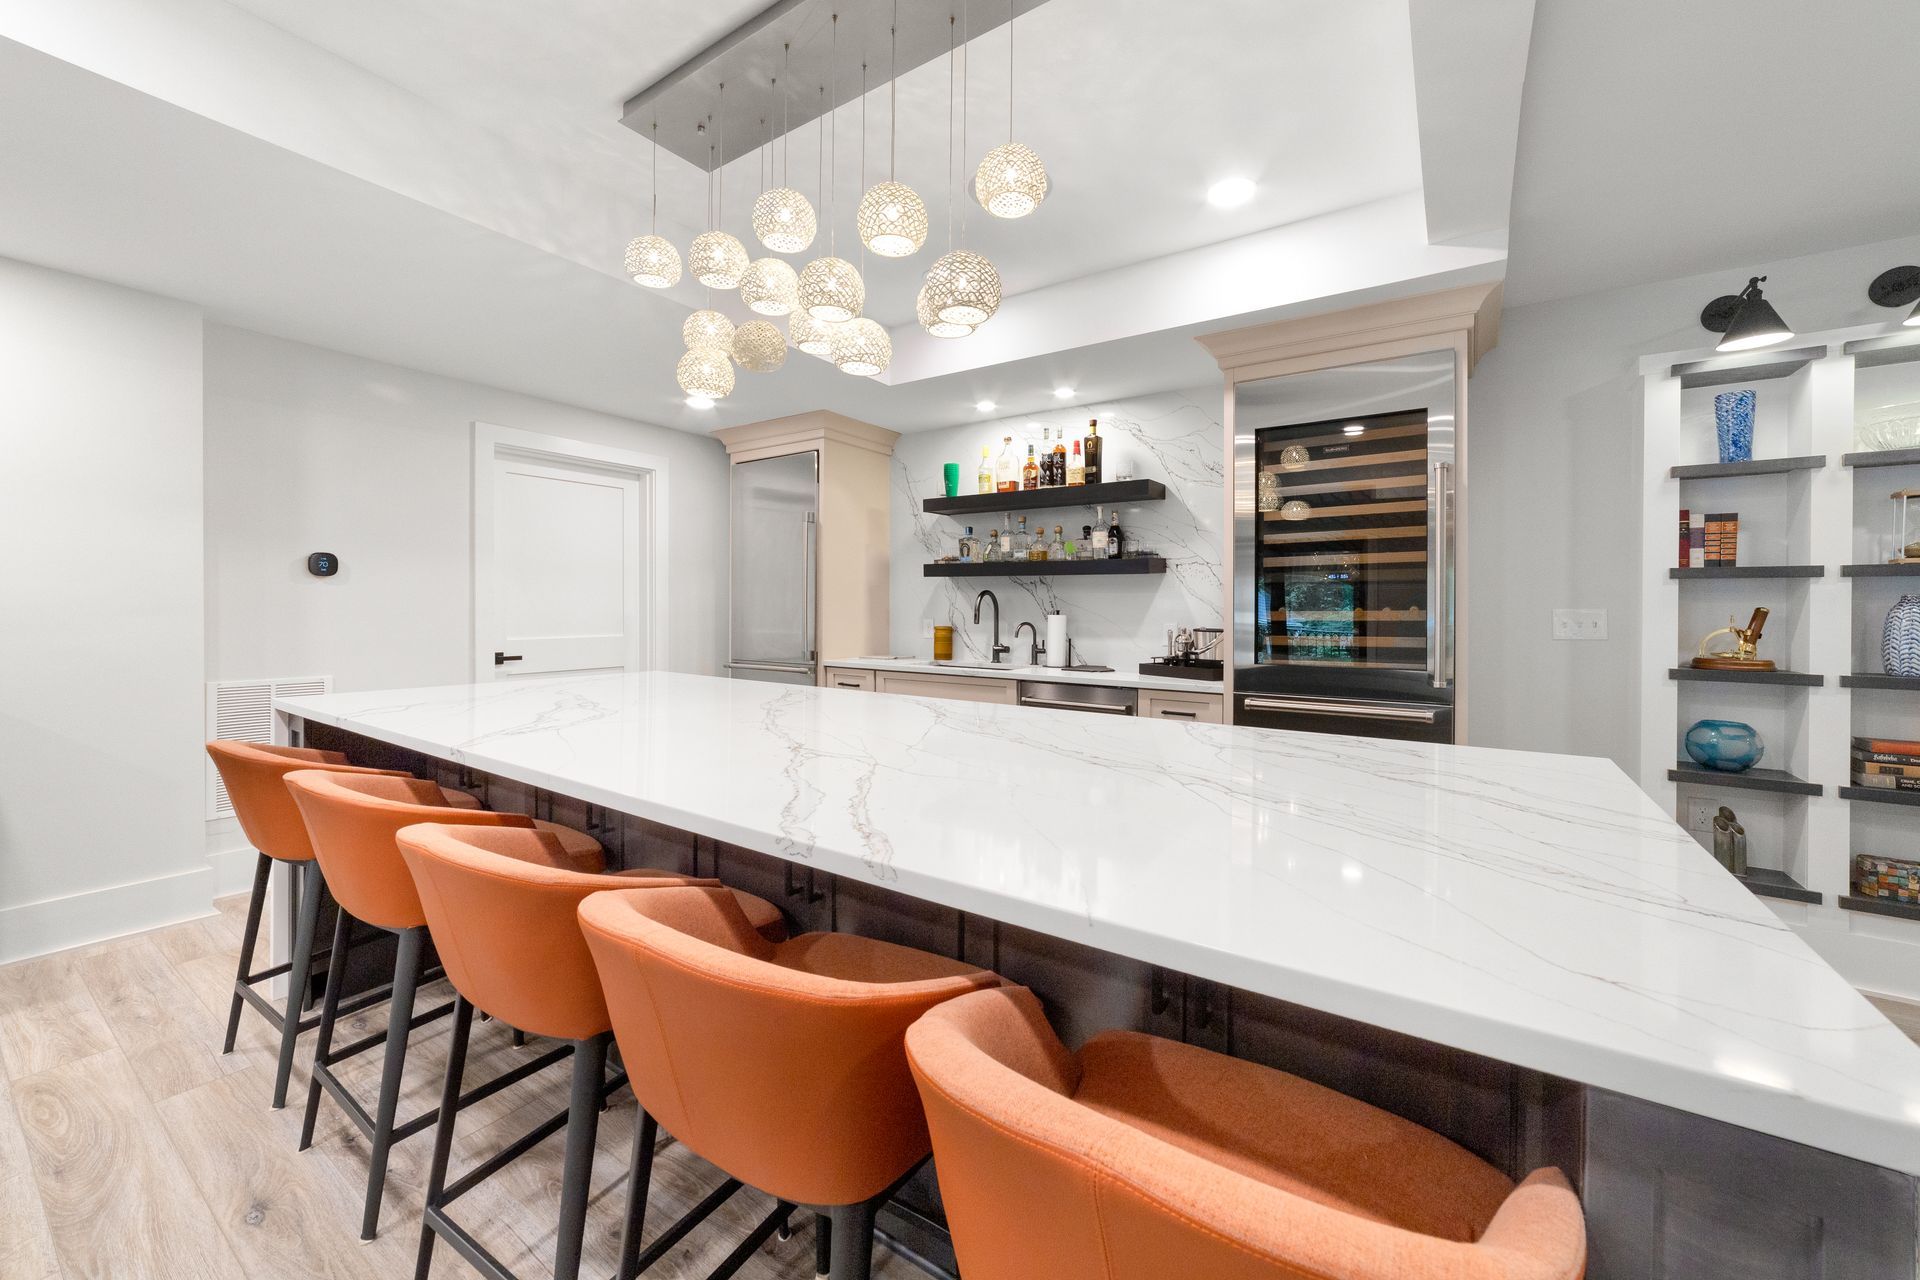 A kitchen with a long counter and orange chairs.